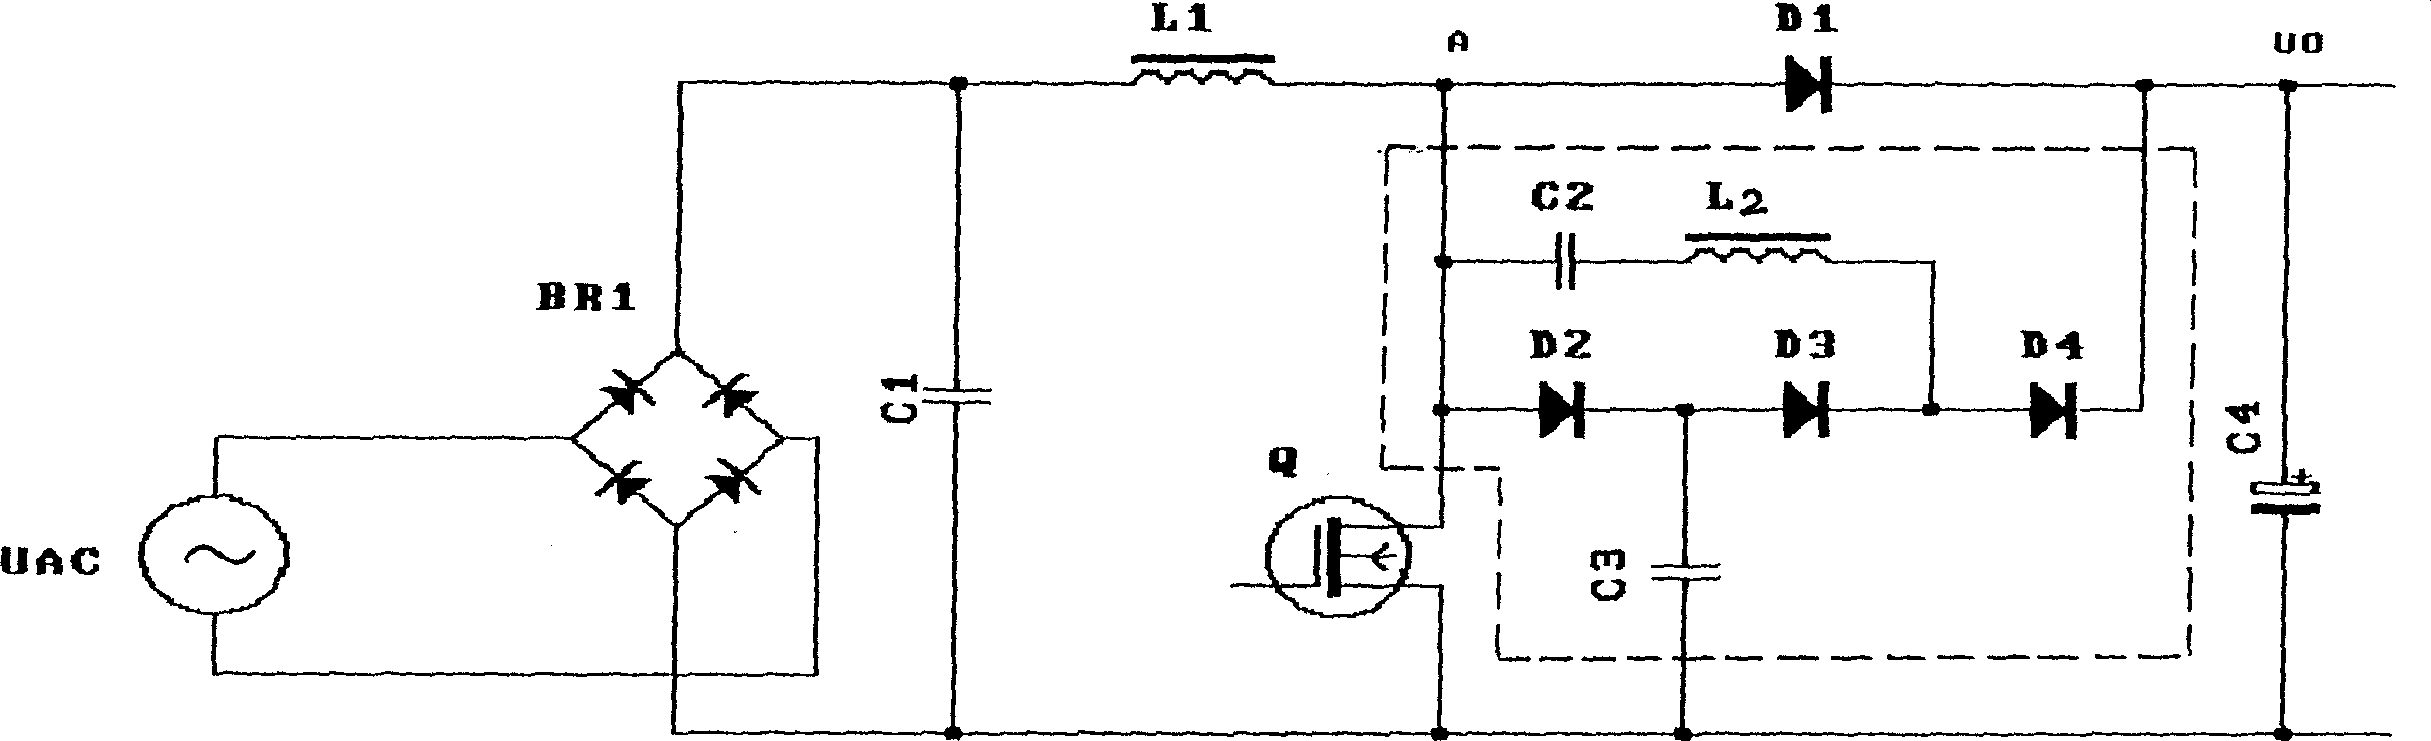 Soft switching circuit without absorption loss